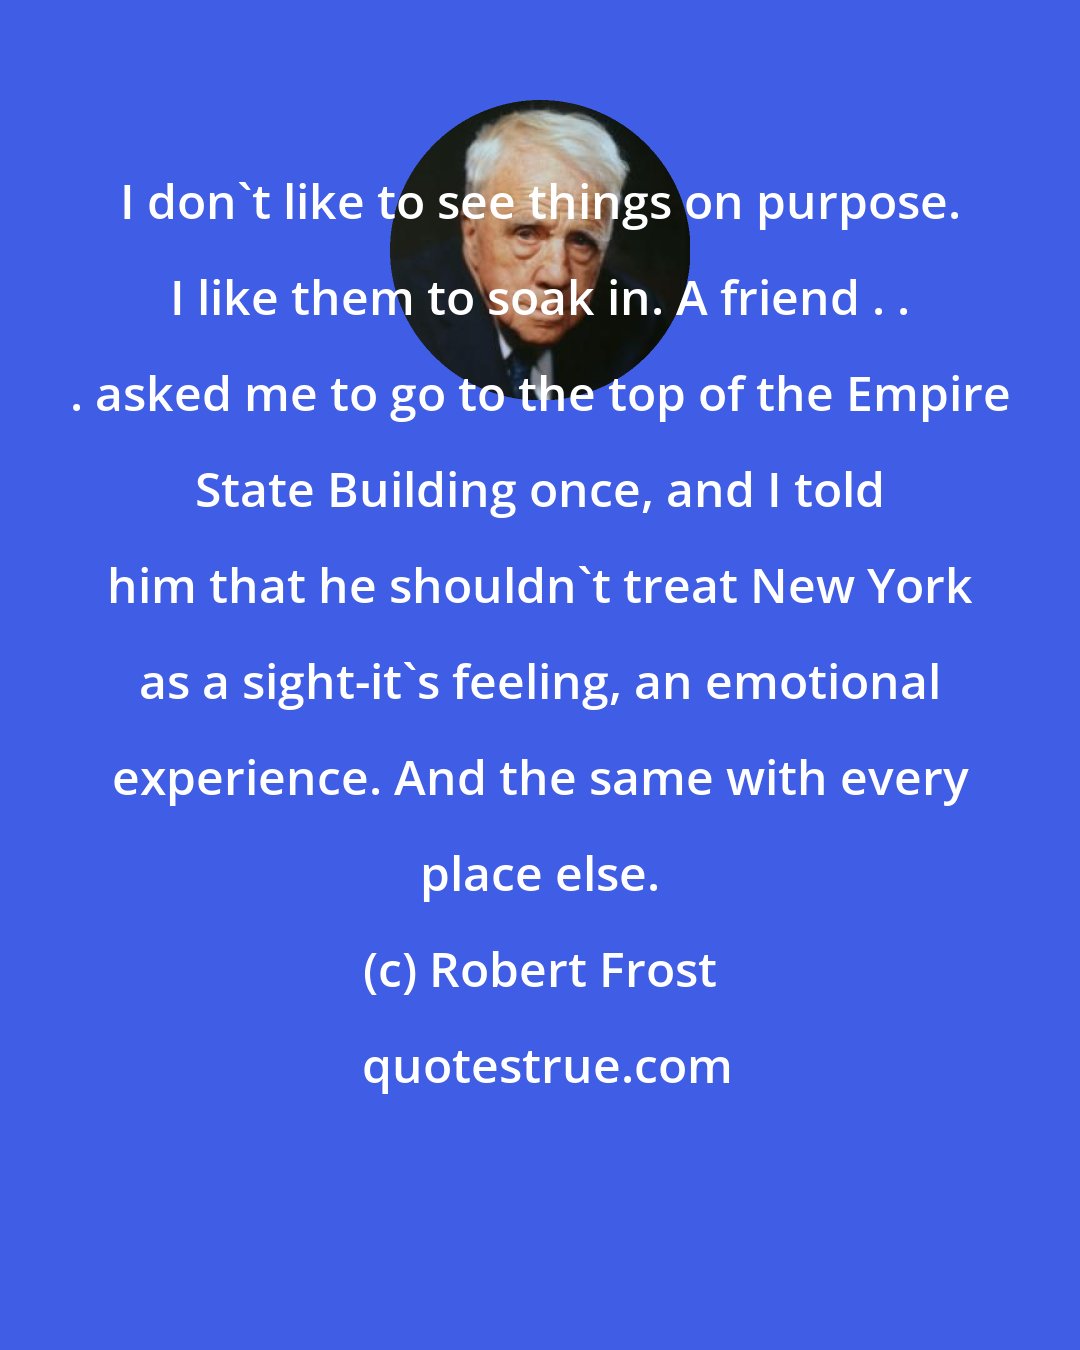 Robert Frost: I don't like to see things on purpose. I like them to soak in. A friend . . . asked me to go to the top of the Empire State Building once, and I told him that he shouldn't treat New York as a sight-it's feeling, an emotional experience. And the same with every place else.